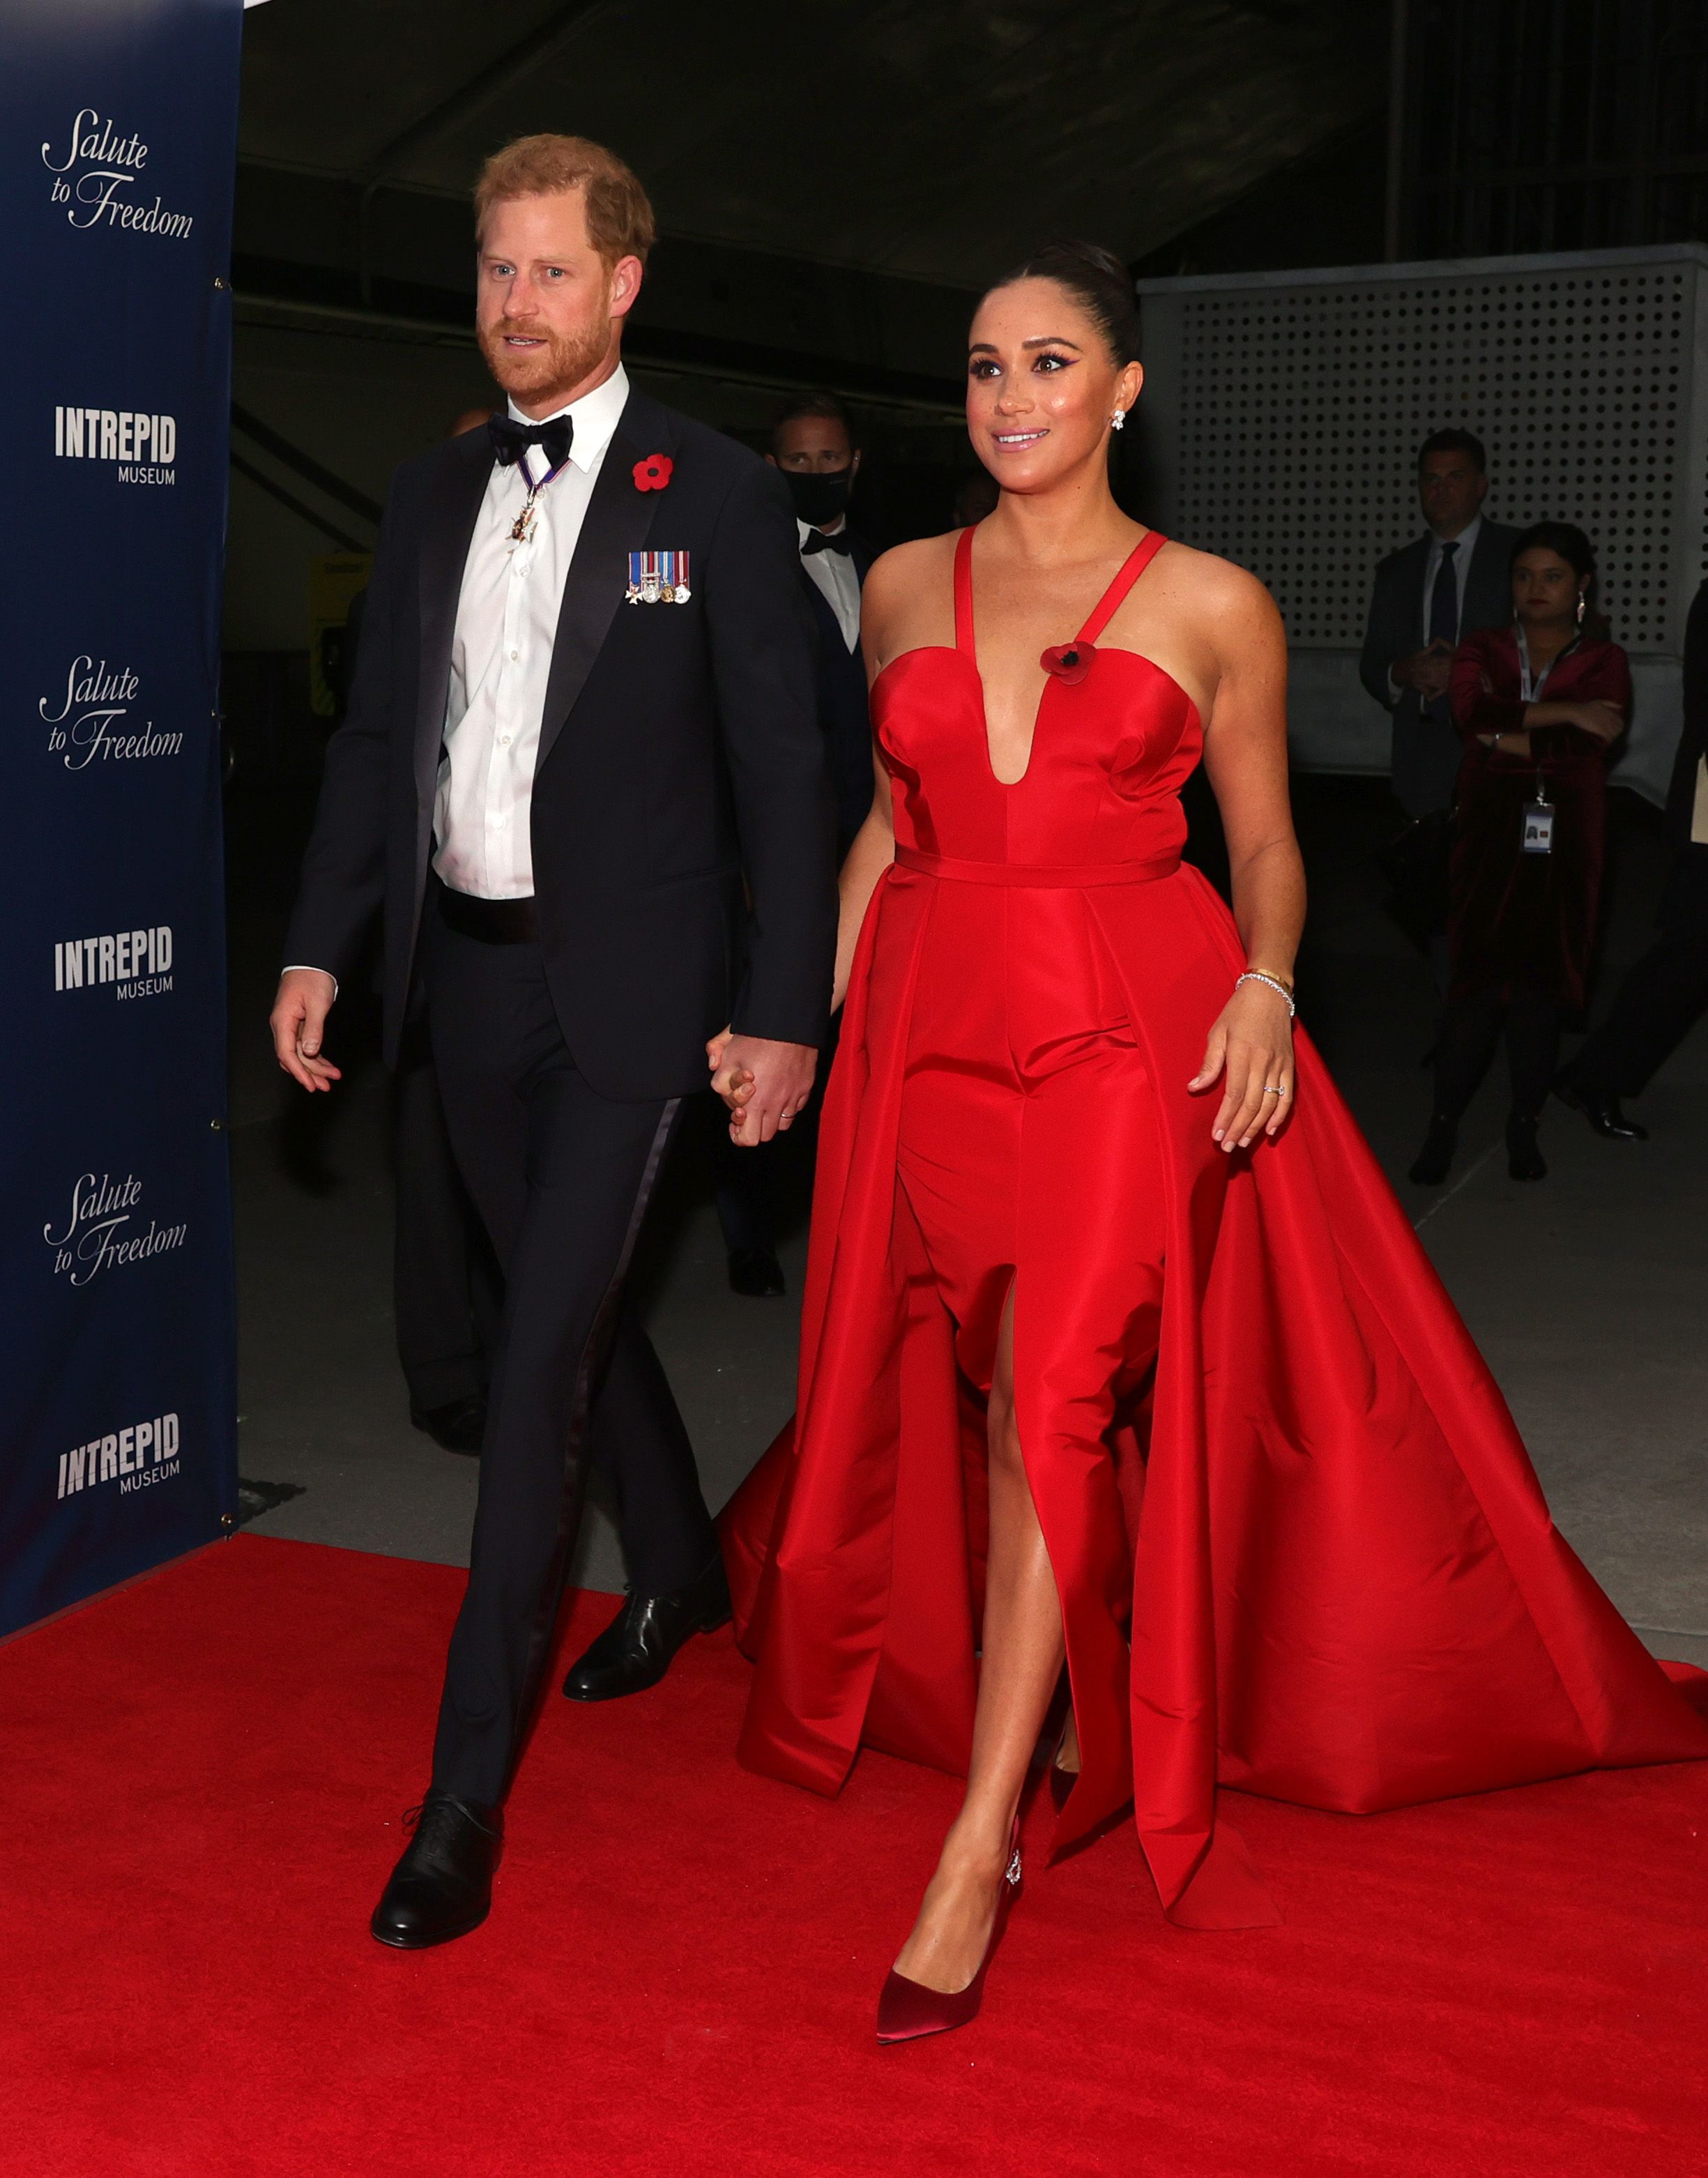 Meghan Markle a Bold Return to the Red Carpet in a Gown